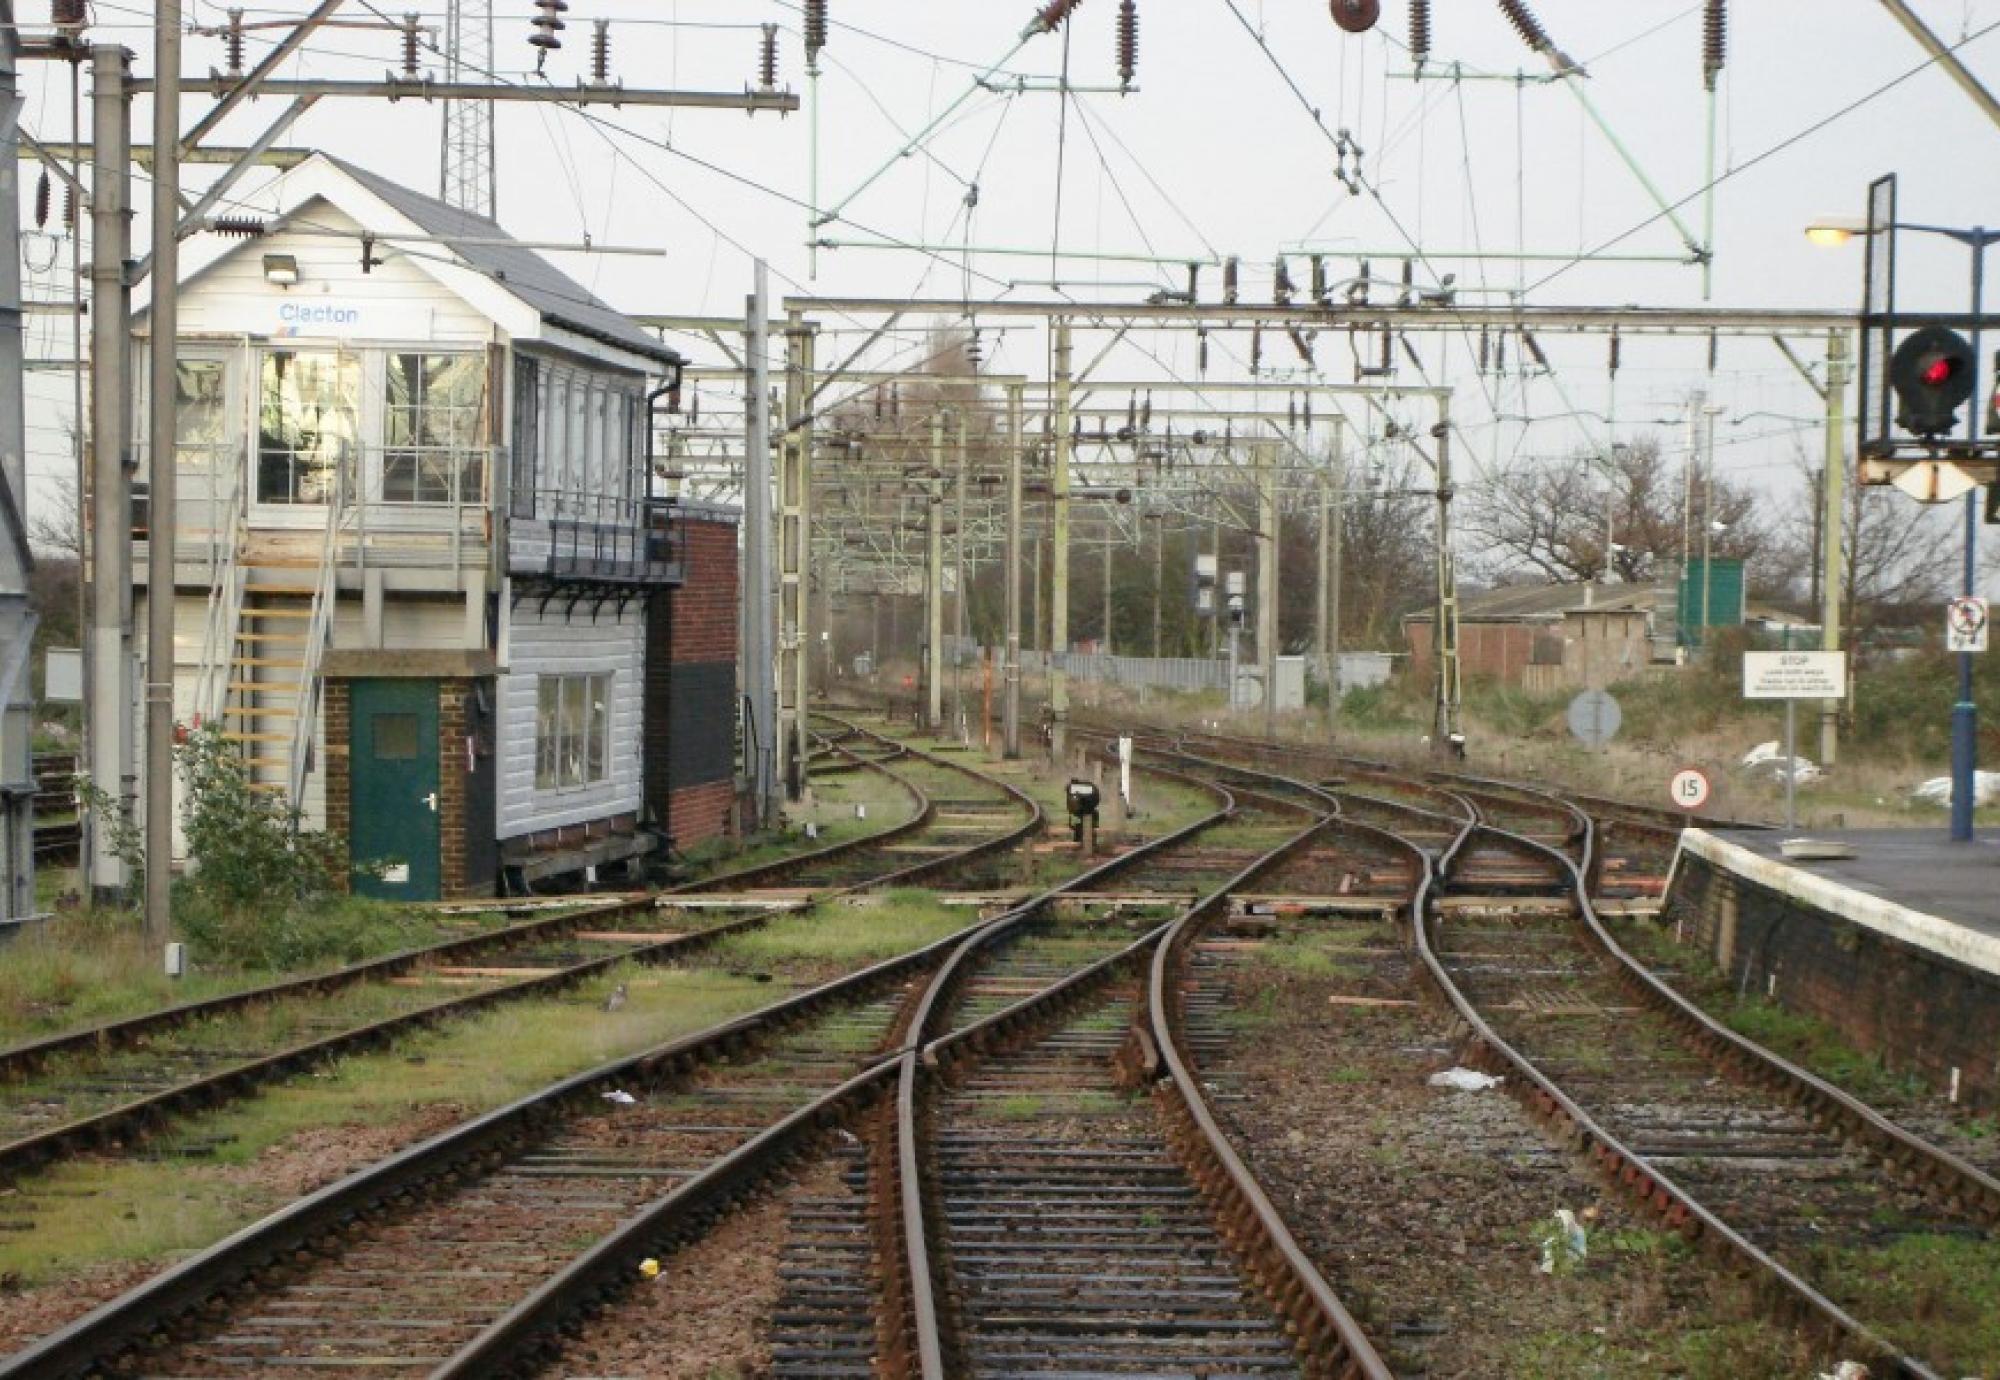 Clacton signal box with points